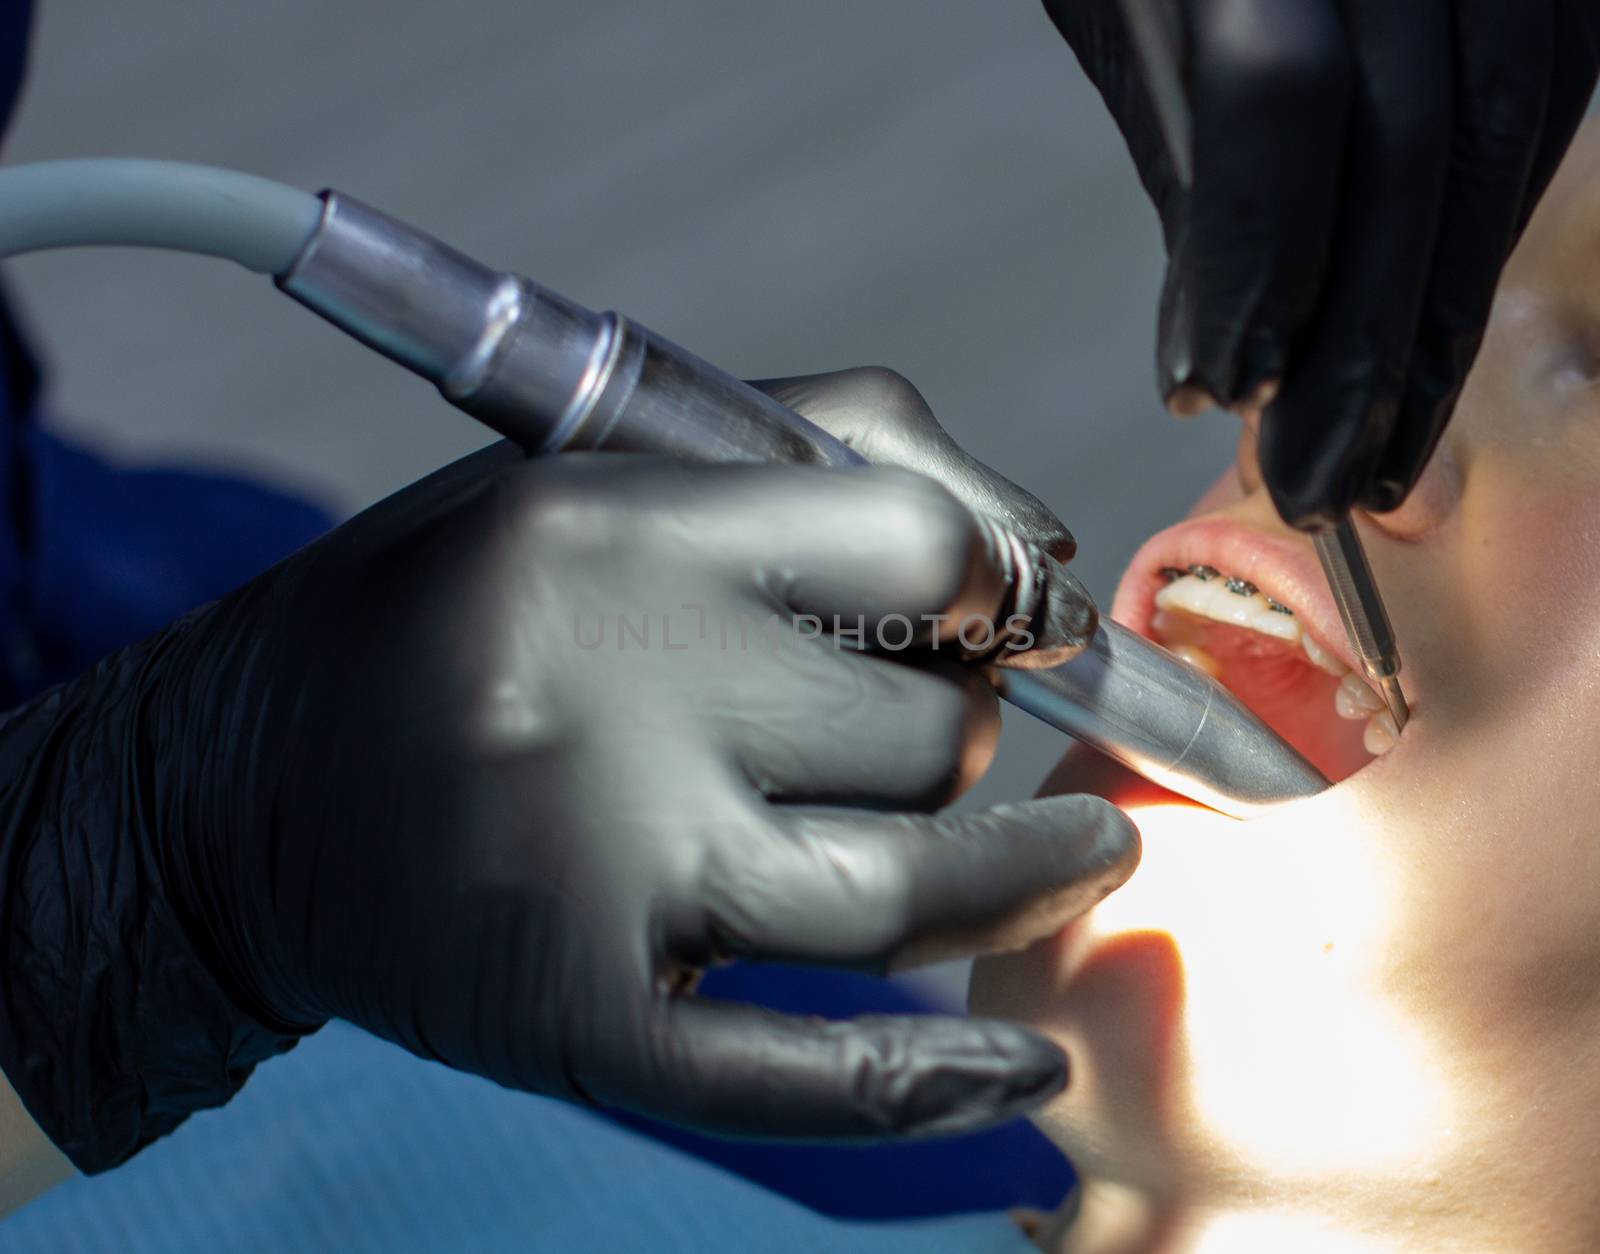 A woman with dental braces visits an orthodontist at the clinic. in the dental chair during the procedure of installing braces on the upper and lower teeth. Dentist and assistant work together, they have dental instruments in their hands. concept of dentistry